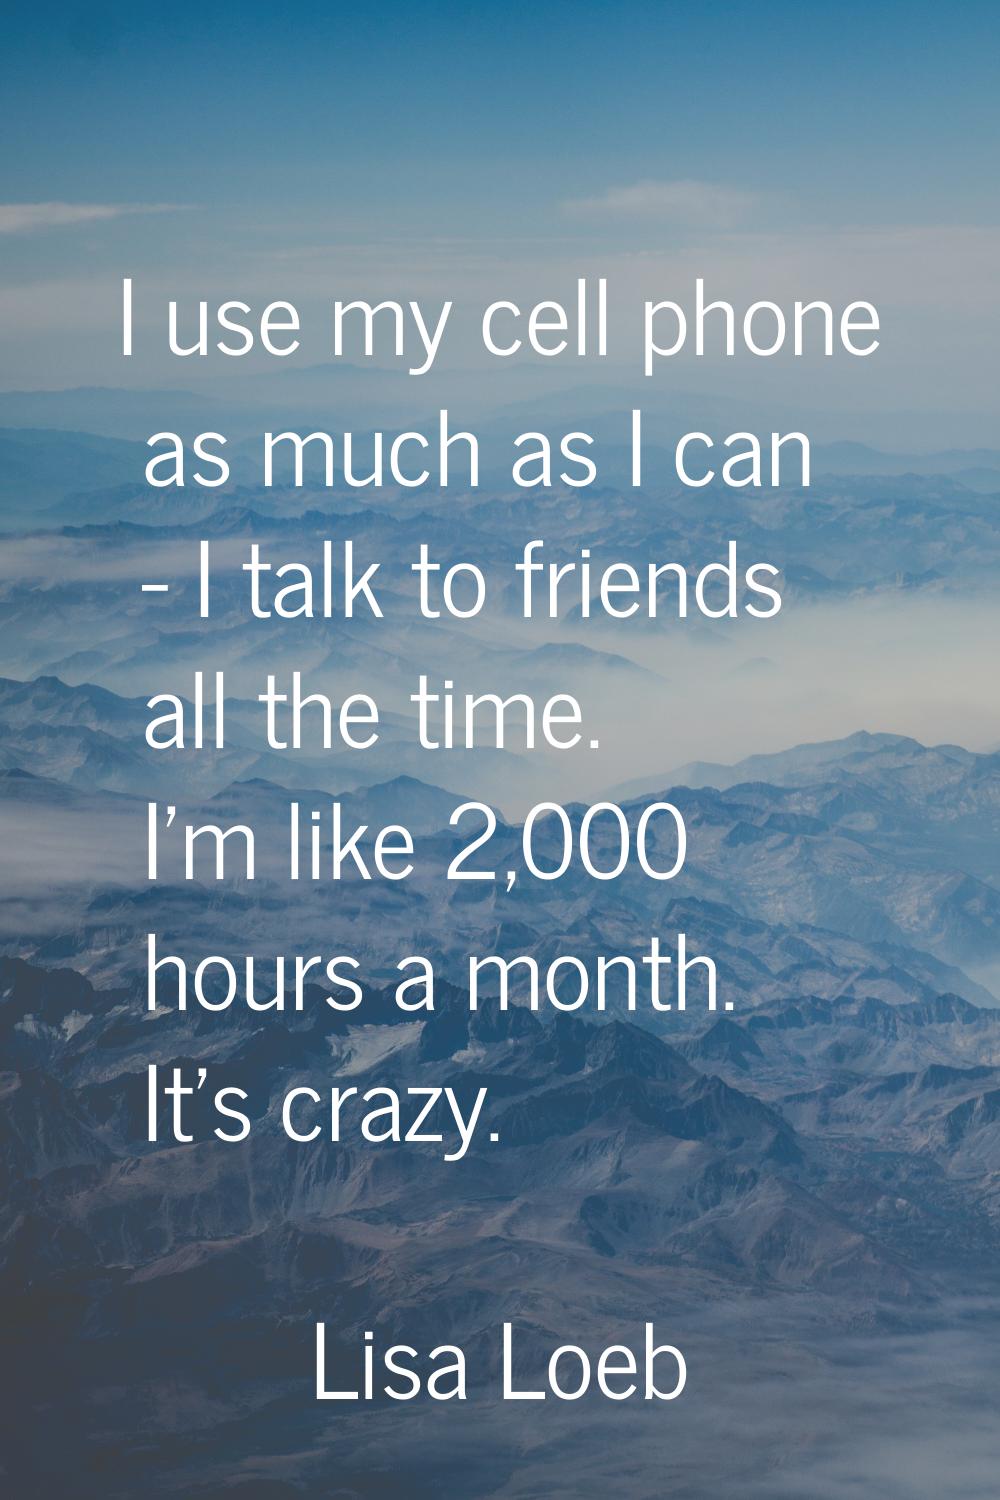 I use my cell phone as much as I can - I talk to friends all the time. I'm like 2,000 hours a month